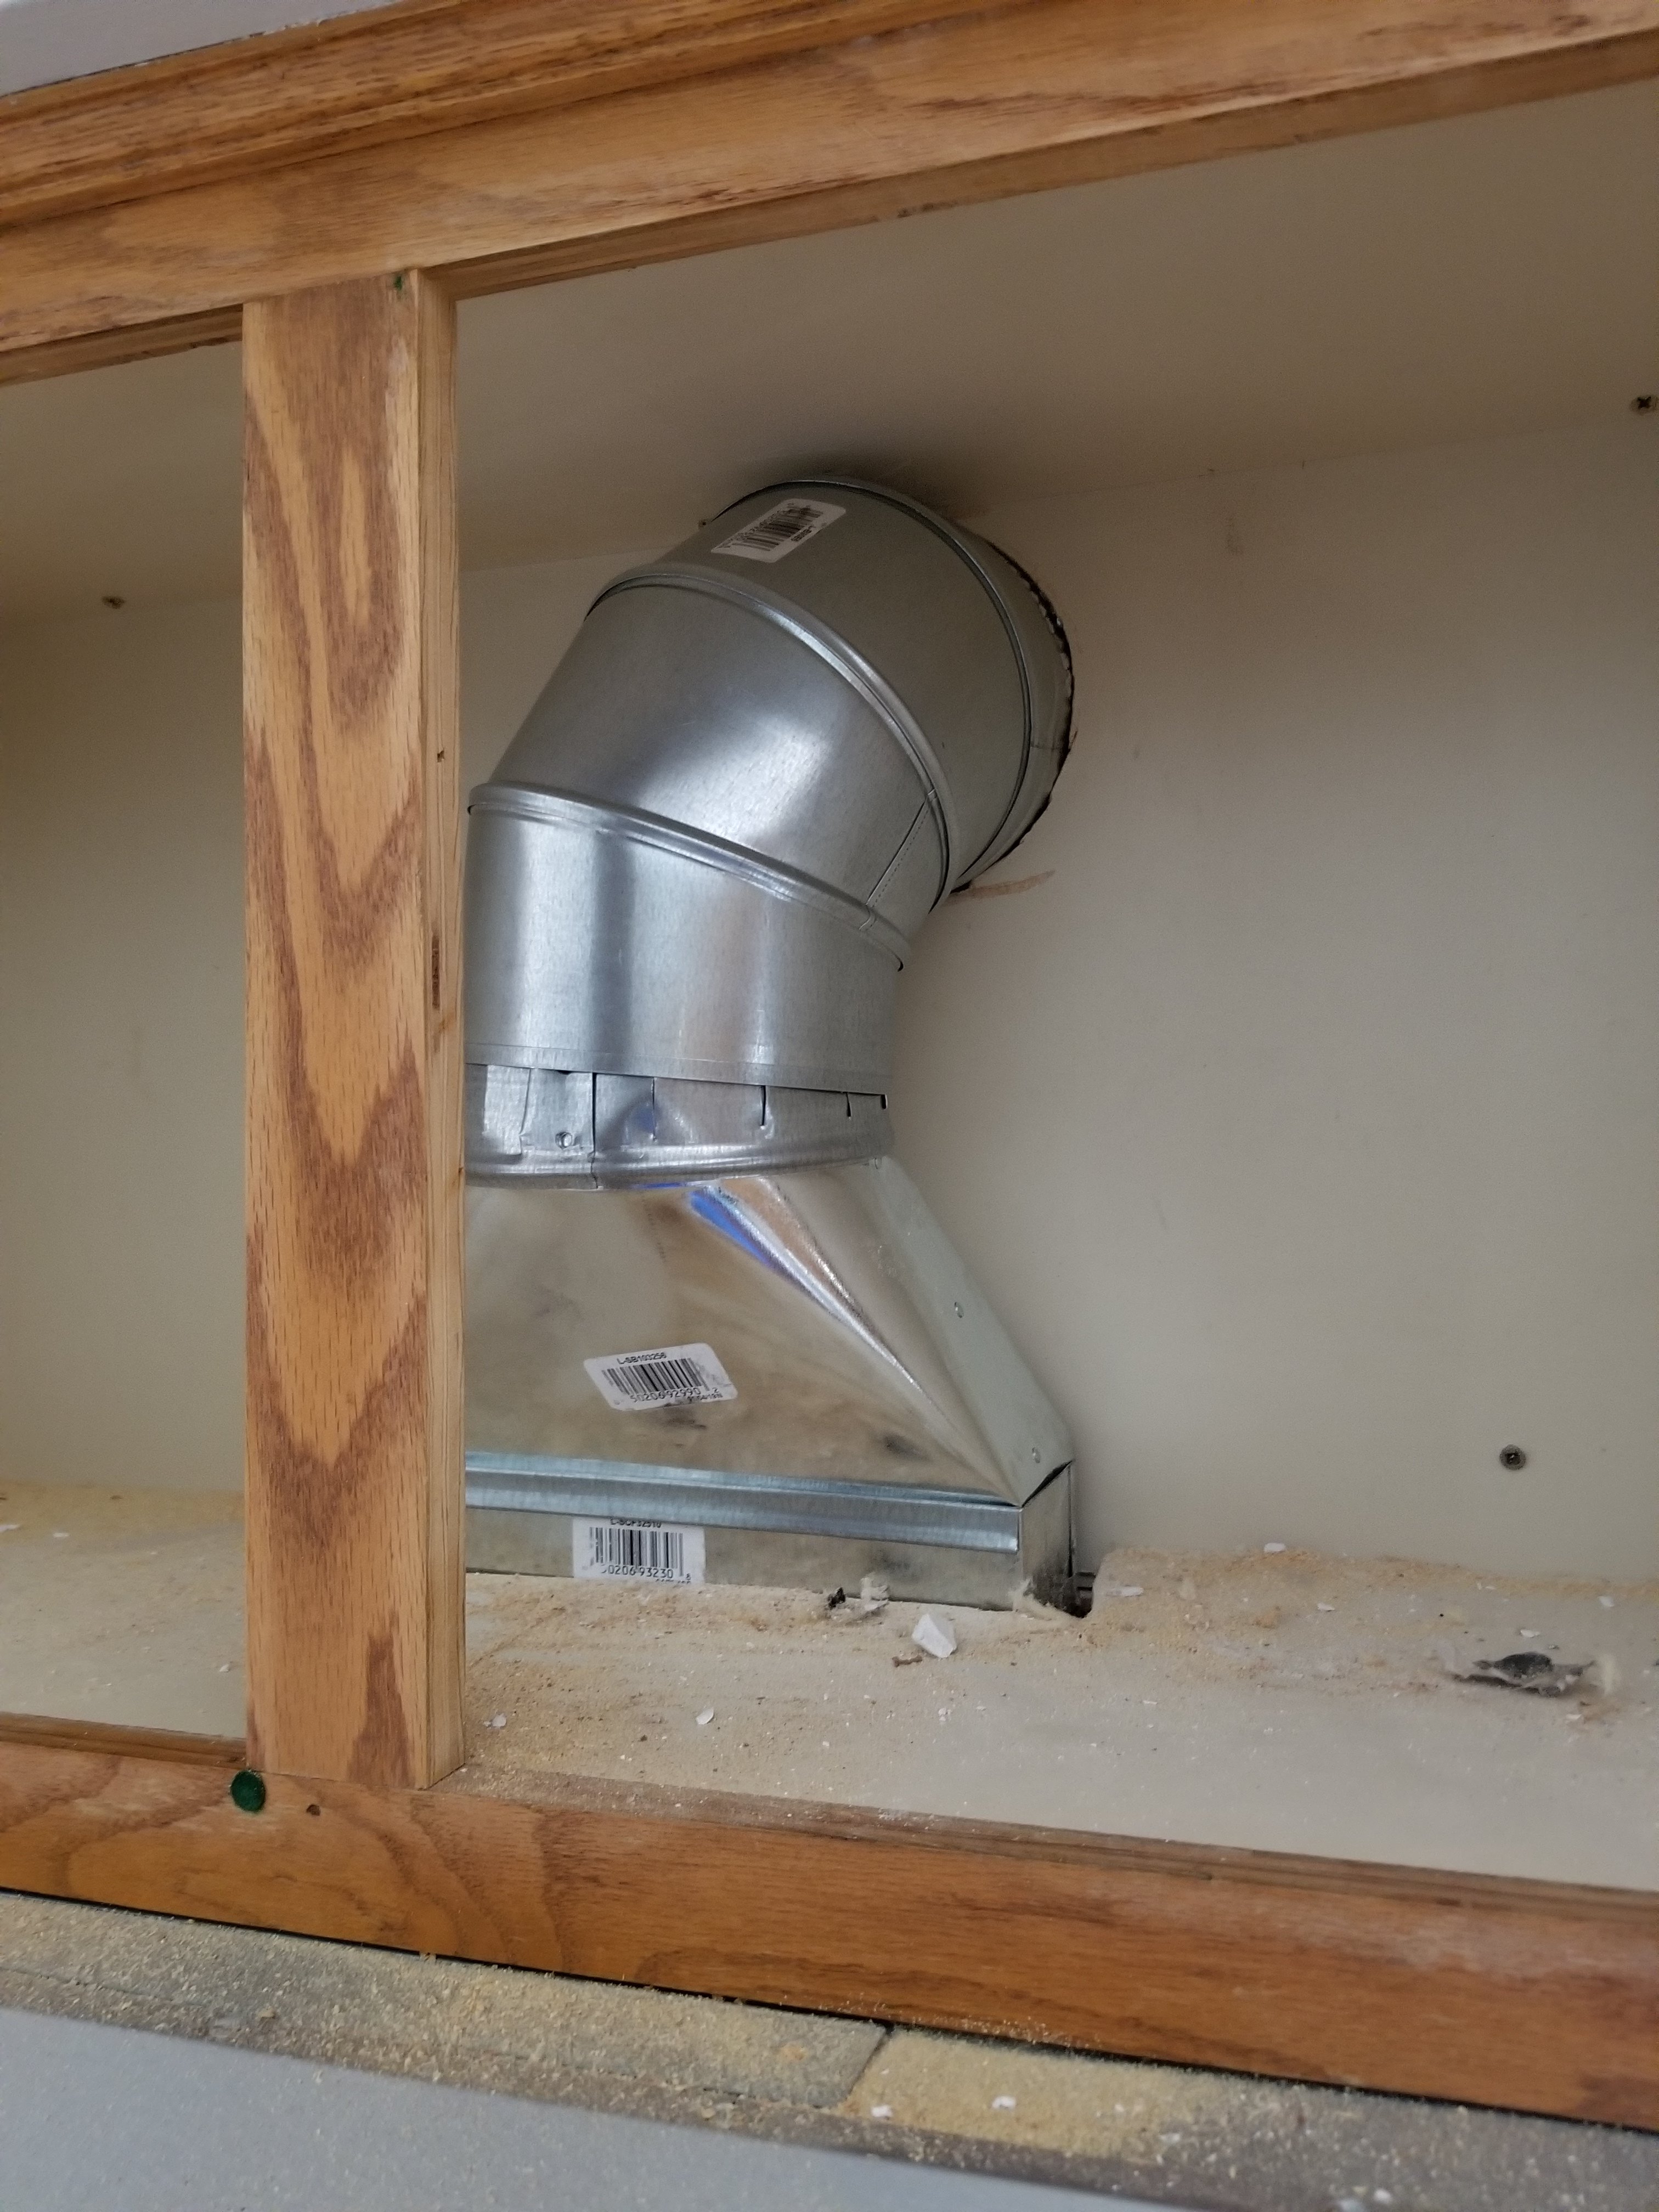 How To Install Oven Hood Vent | TcWorks.Org